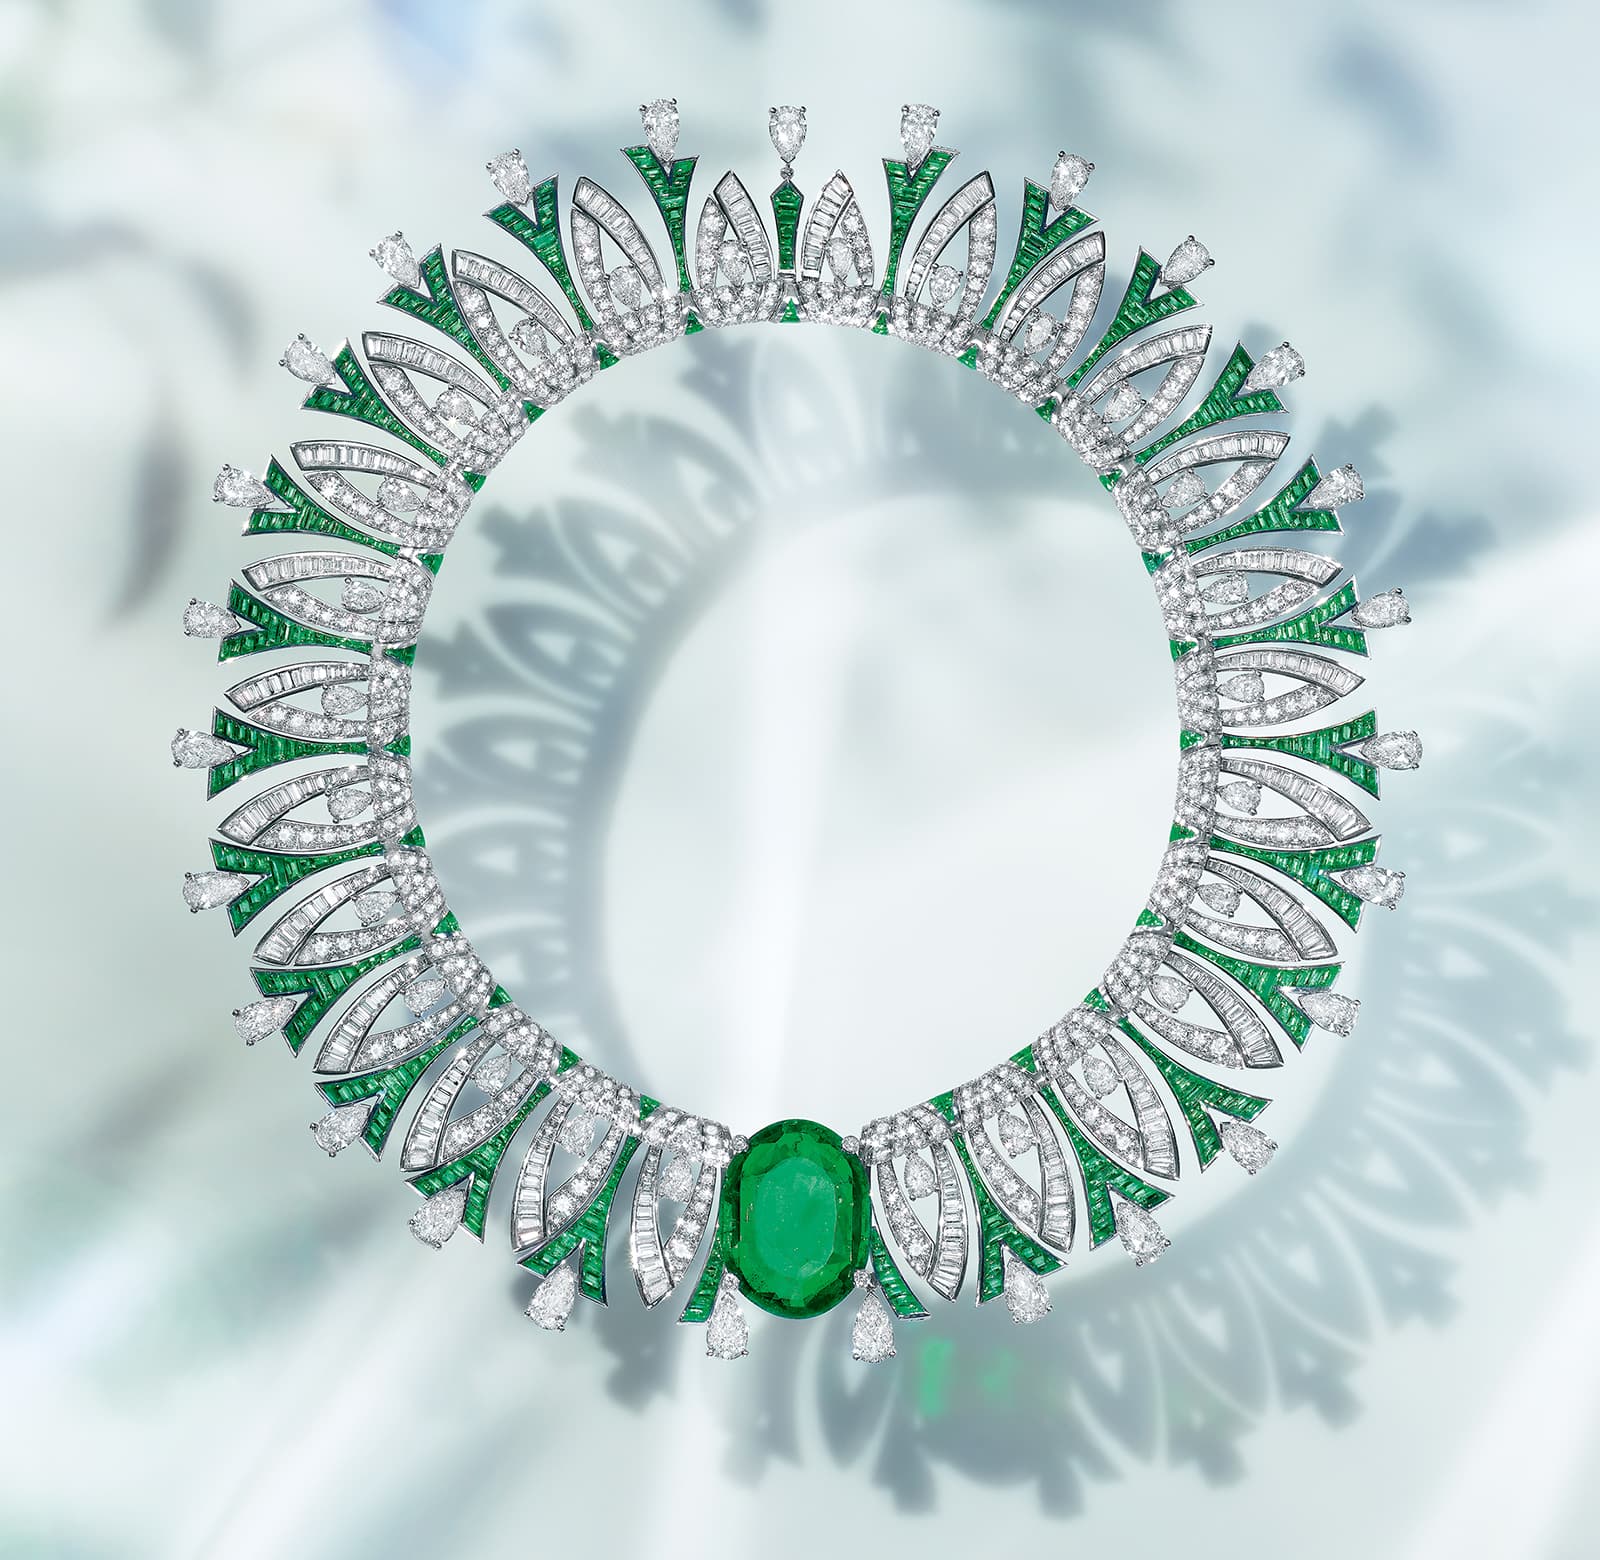 Bulgari Tribute to Paris necklace from the Eden The Garden of Wonders High Jewellery collection, set with a 35.53 carat oval-shaped Colombian emerald cabochon, six pear-shaped diamonds of 6.08 carats, plus buff top emeralds, fancy-cut diamonds and pavé-set stones